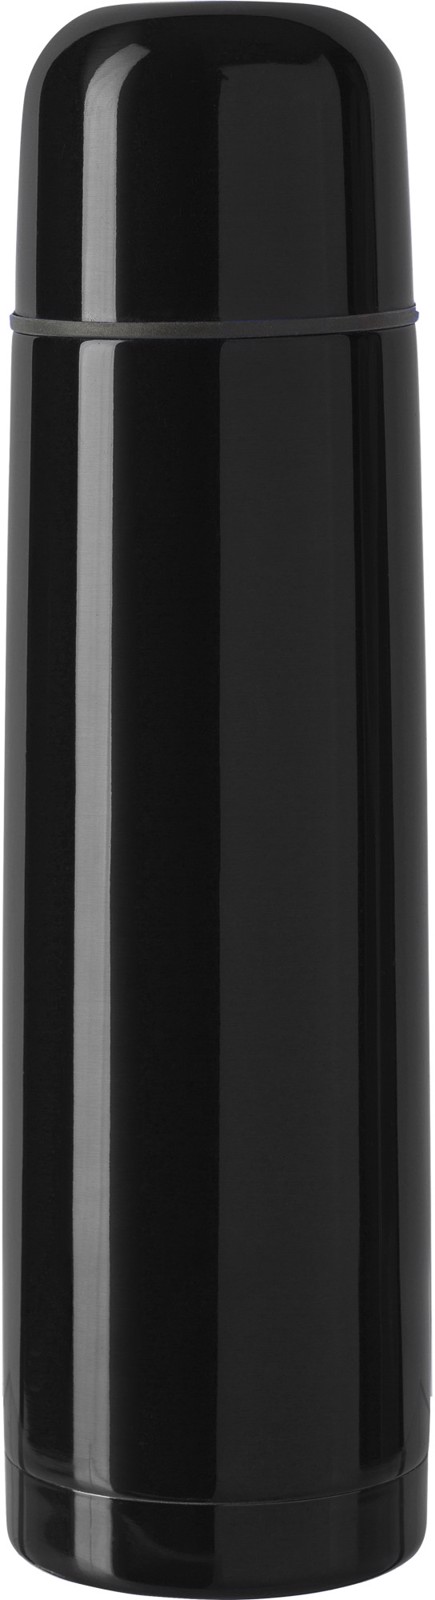 Stainless steel double walled flask - Black